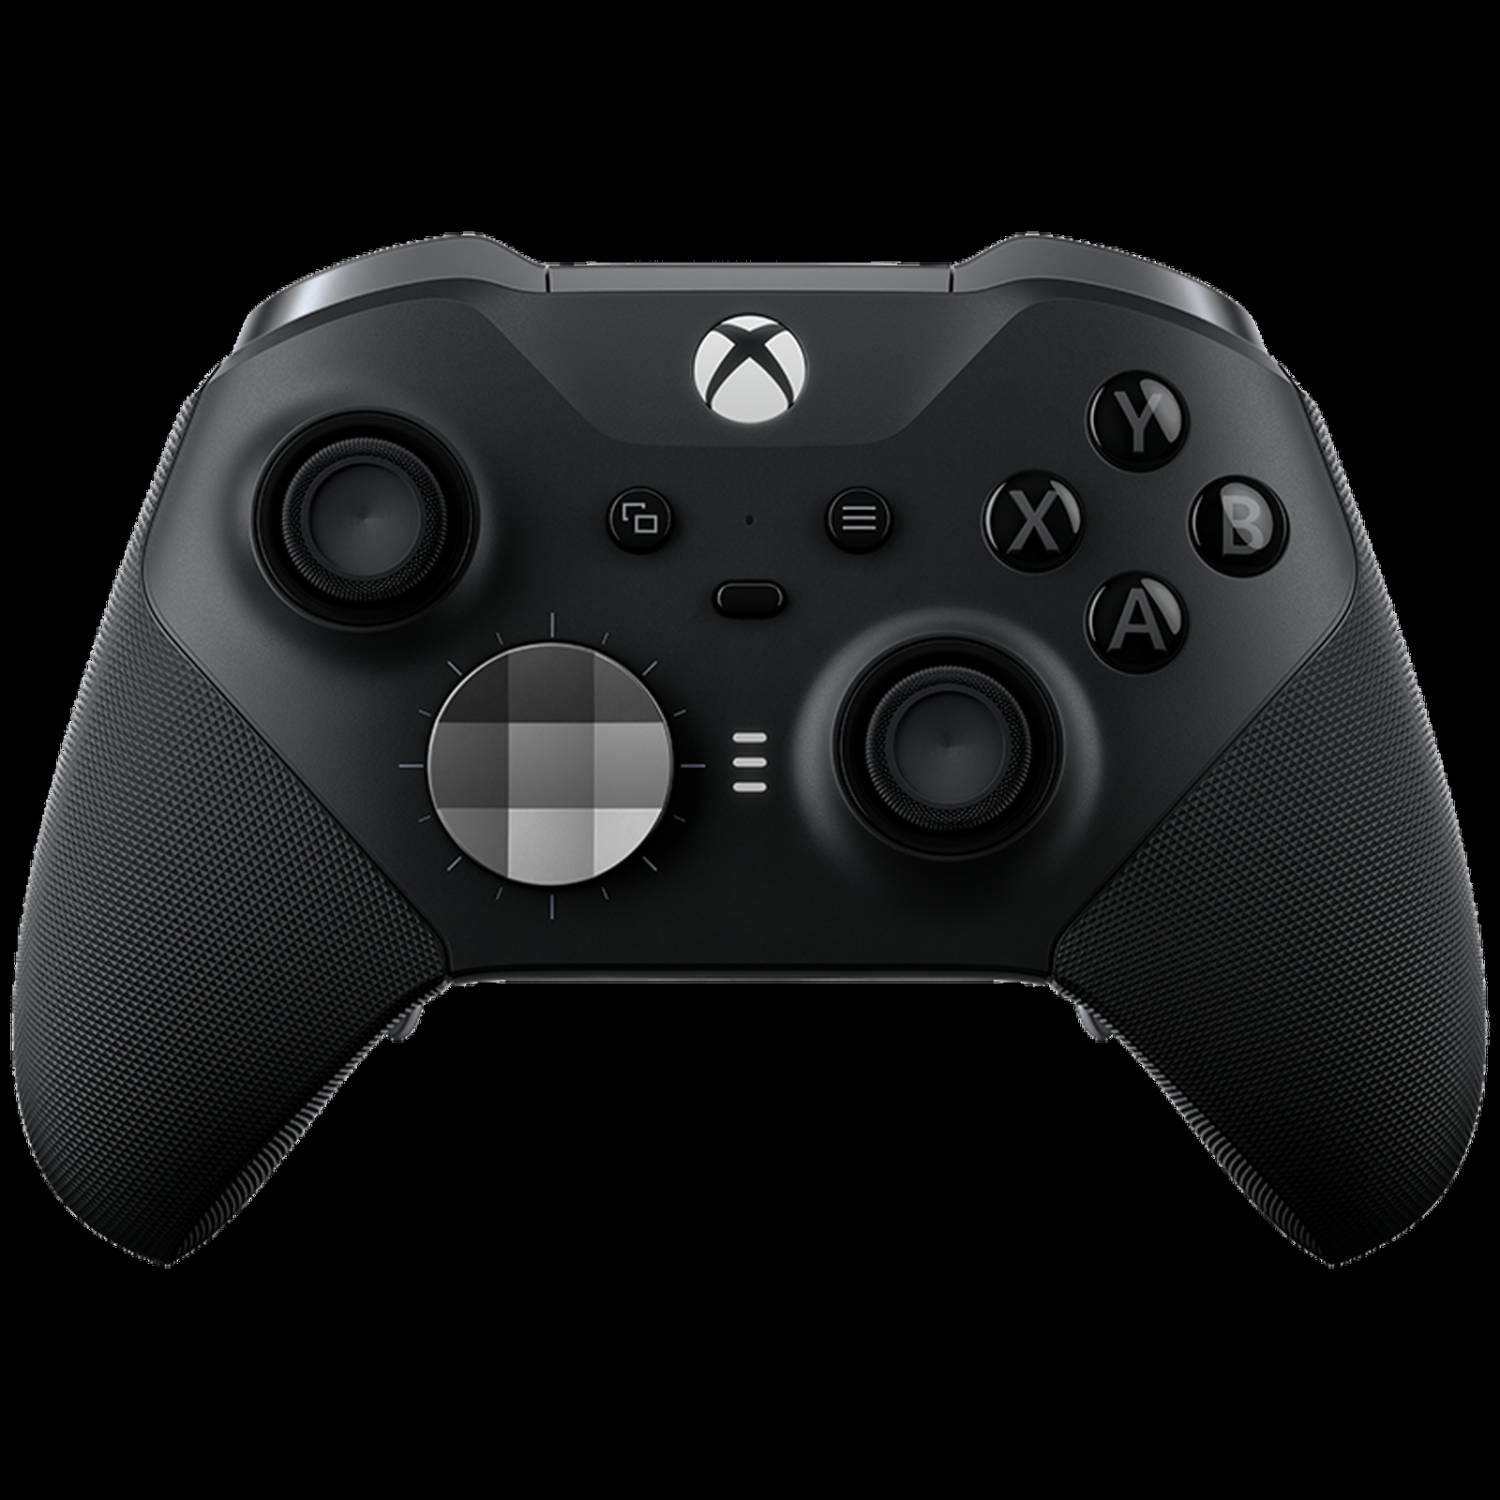 Refurbished { Excellent } - Xbox Elite Series 2 Wireless Controller for Xbox Series X|S / Xbox One - Black